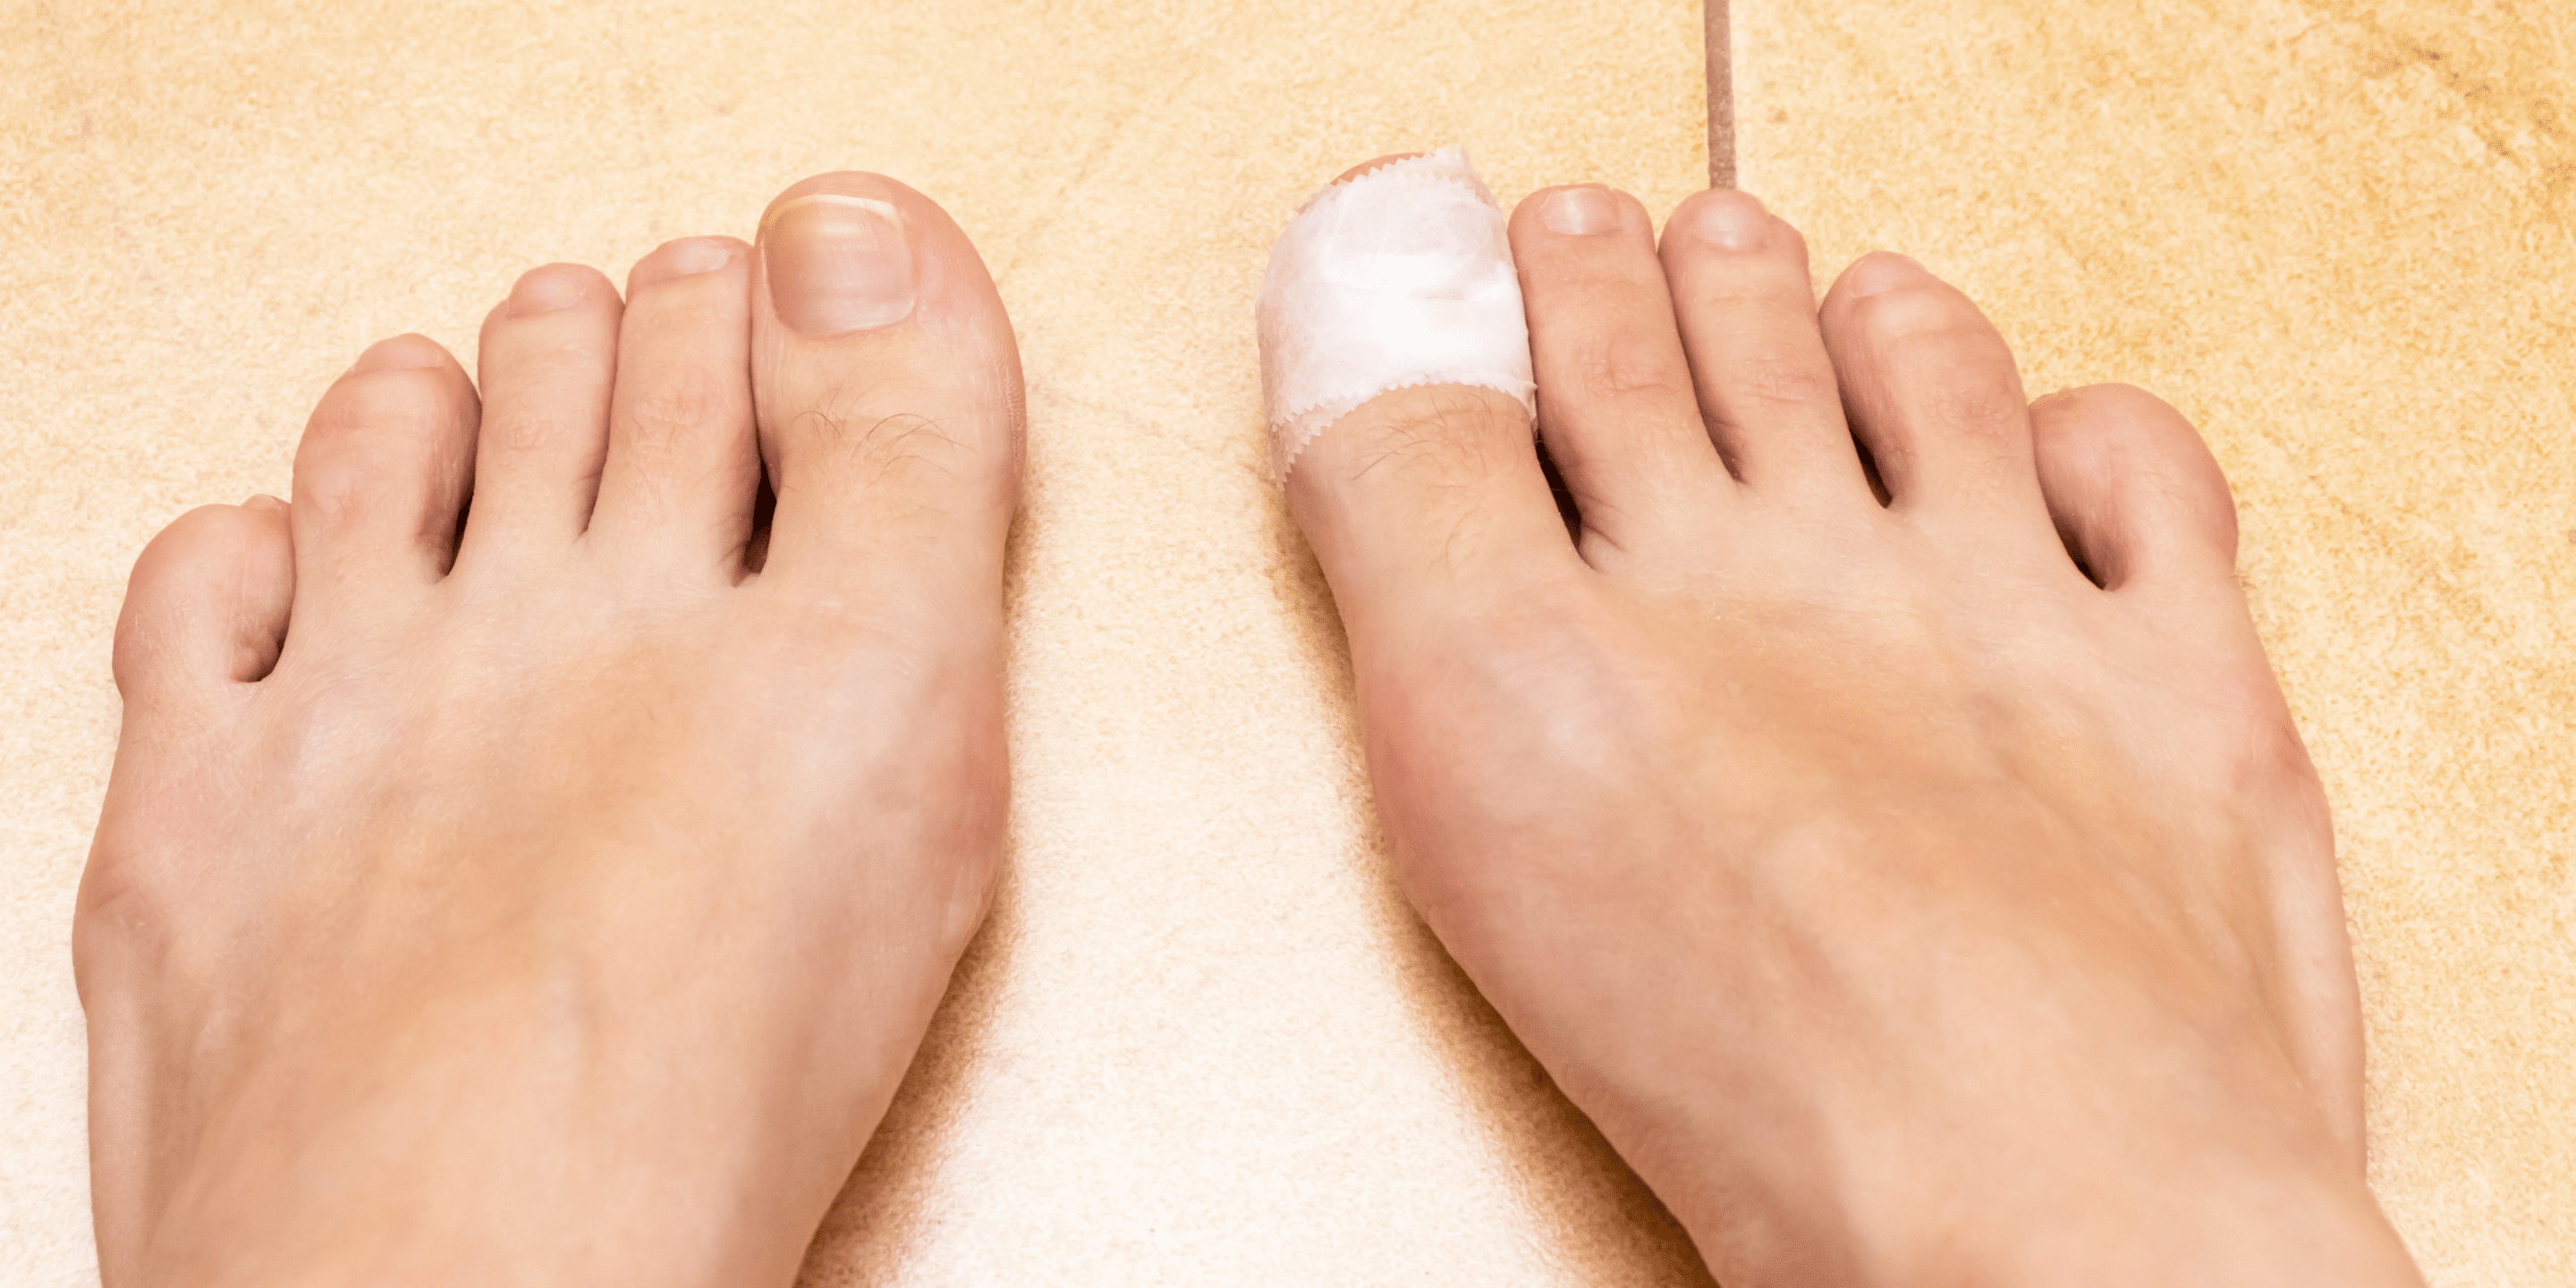 Woman's bare foot with a bandage on a toe. Wounded toe first aid